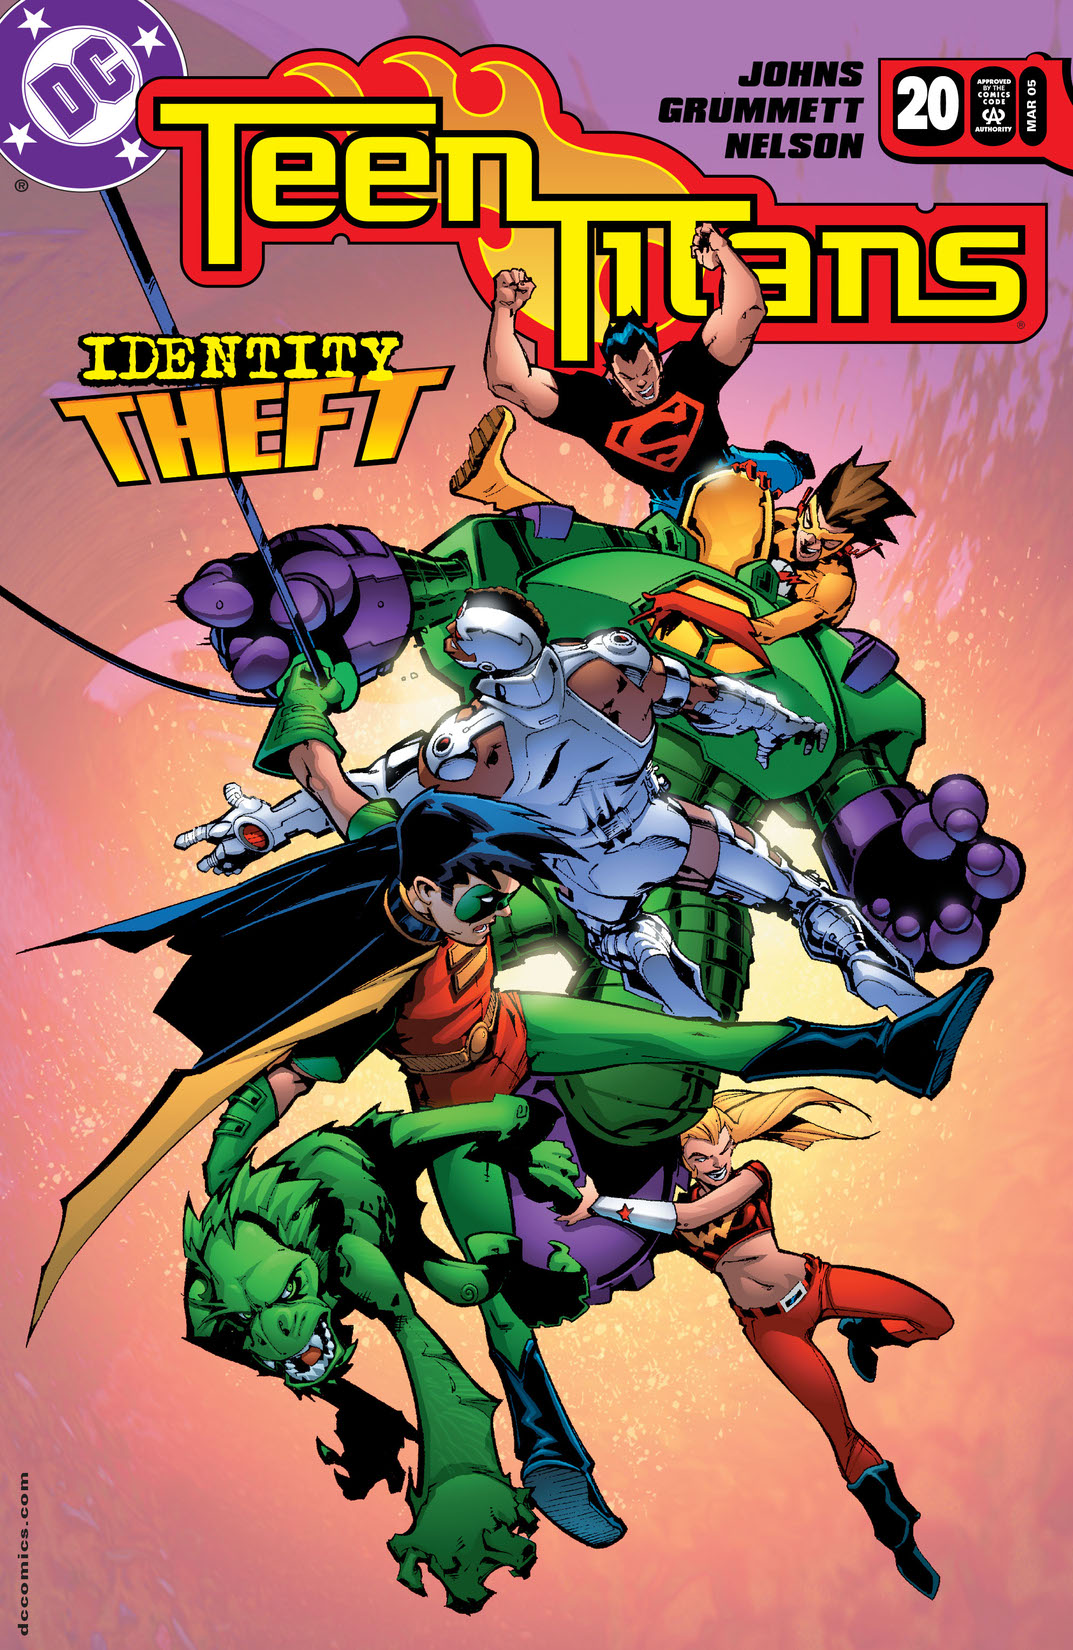 Teen Titans (2003-) #20 preview images